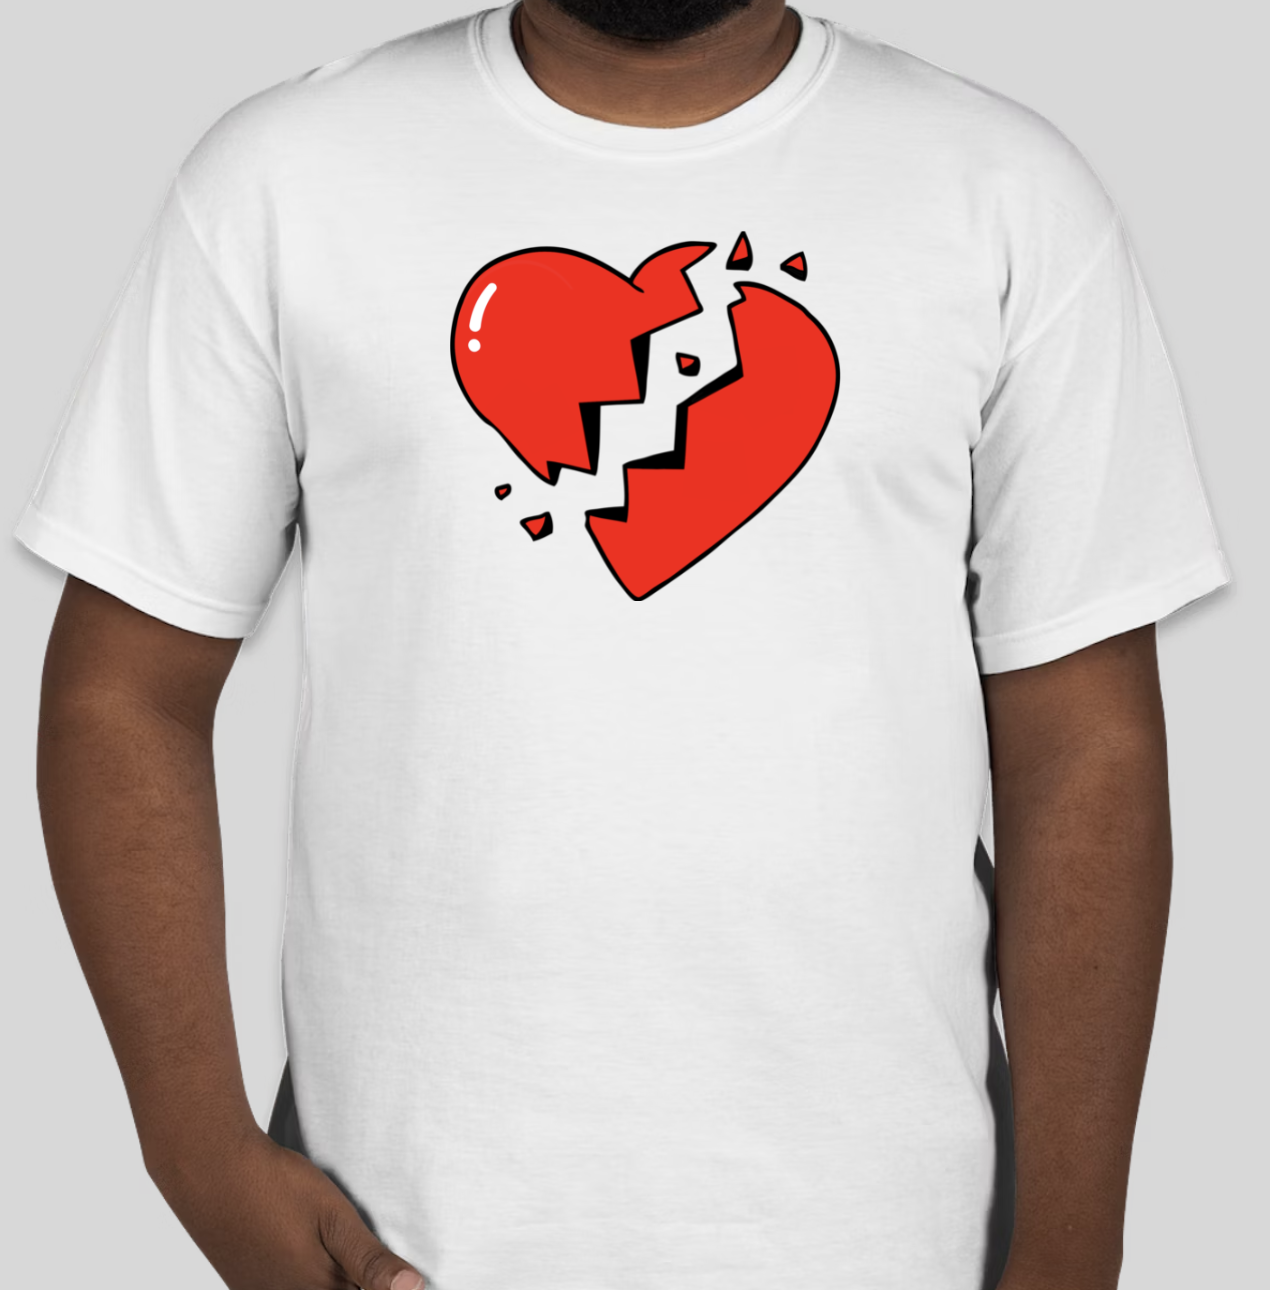 The Heart Break t-shirt features the classic BHS broken heart. The slim BHS logo has been applied to the back of the t-shirt.